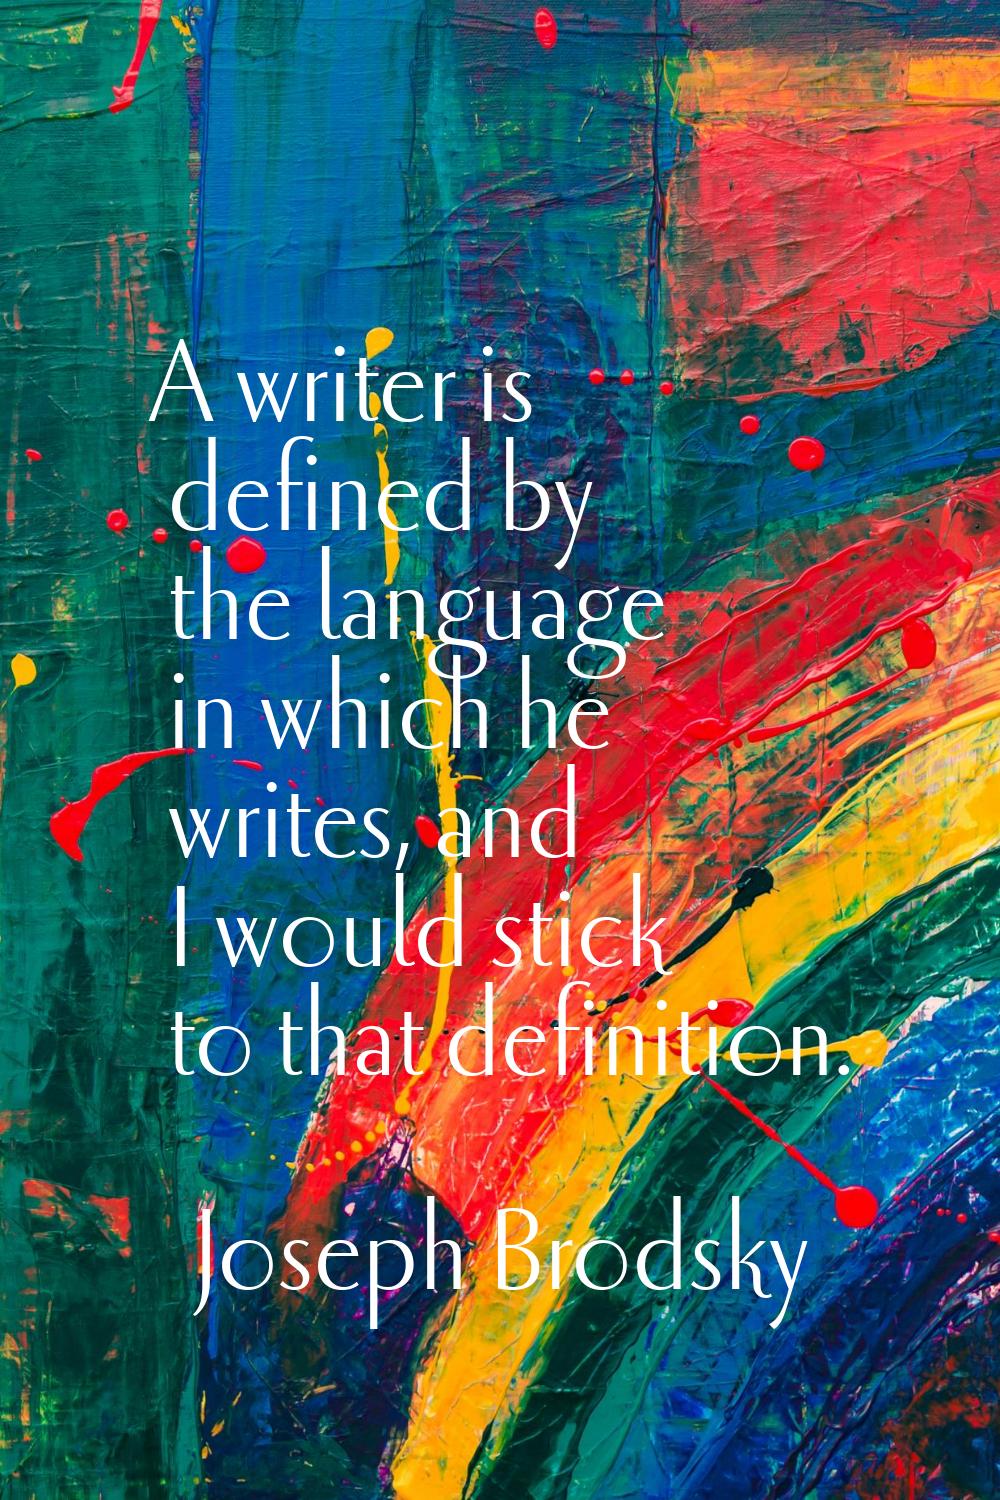 A writer is defined by the language in which he writes, and I would stick to that definition.